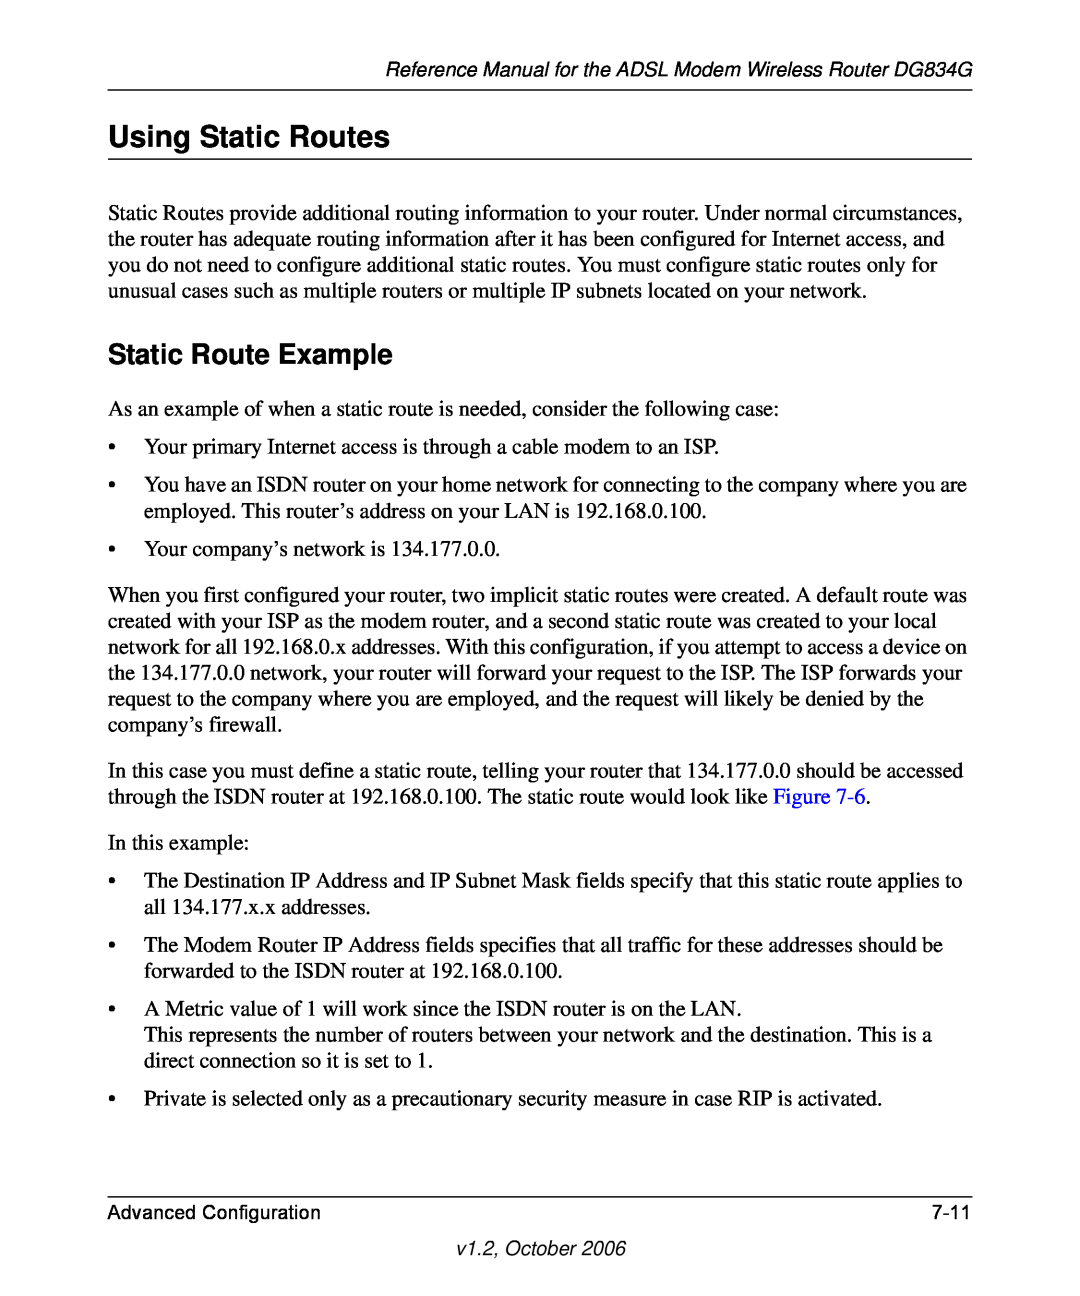 NETGEAR DG834G manual Using Static Routes, Static Route Example 